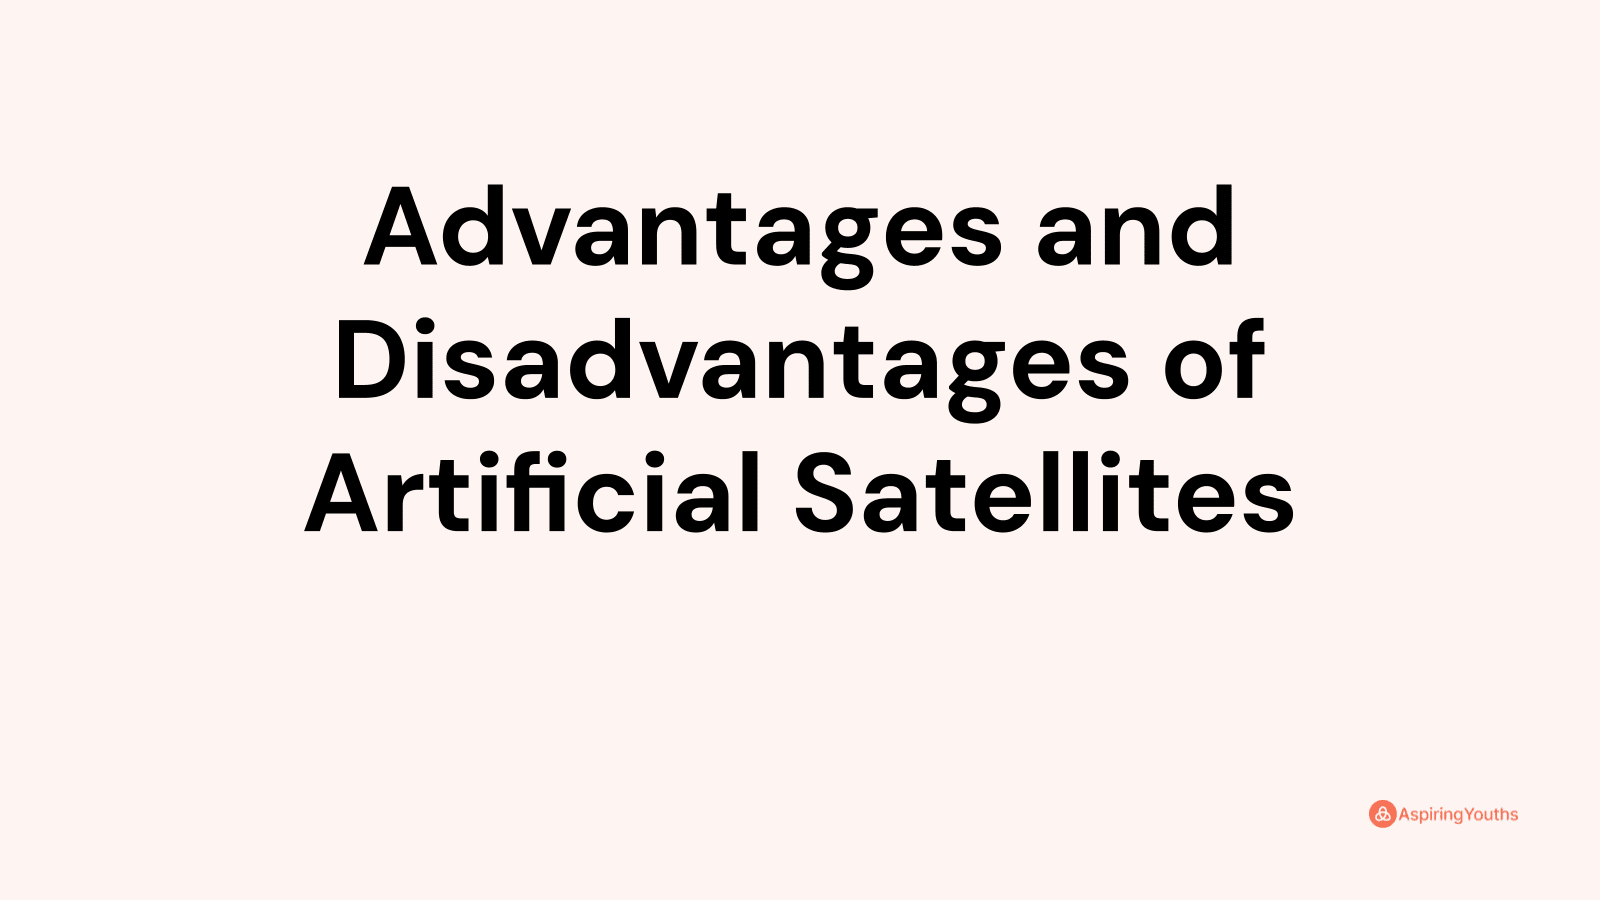 Advantages and disadvantages of Artificial Satellites